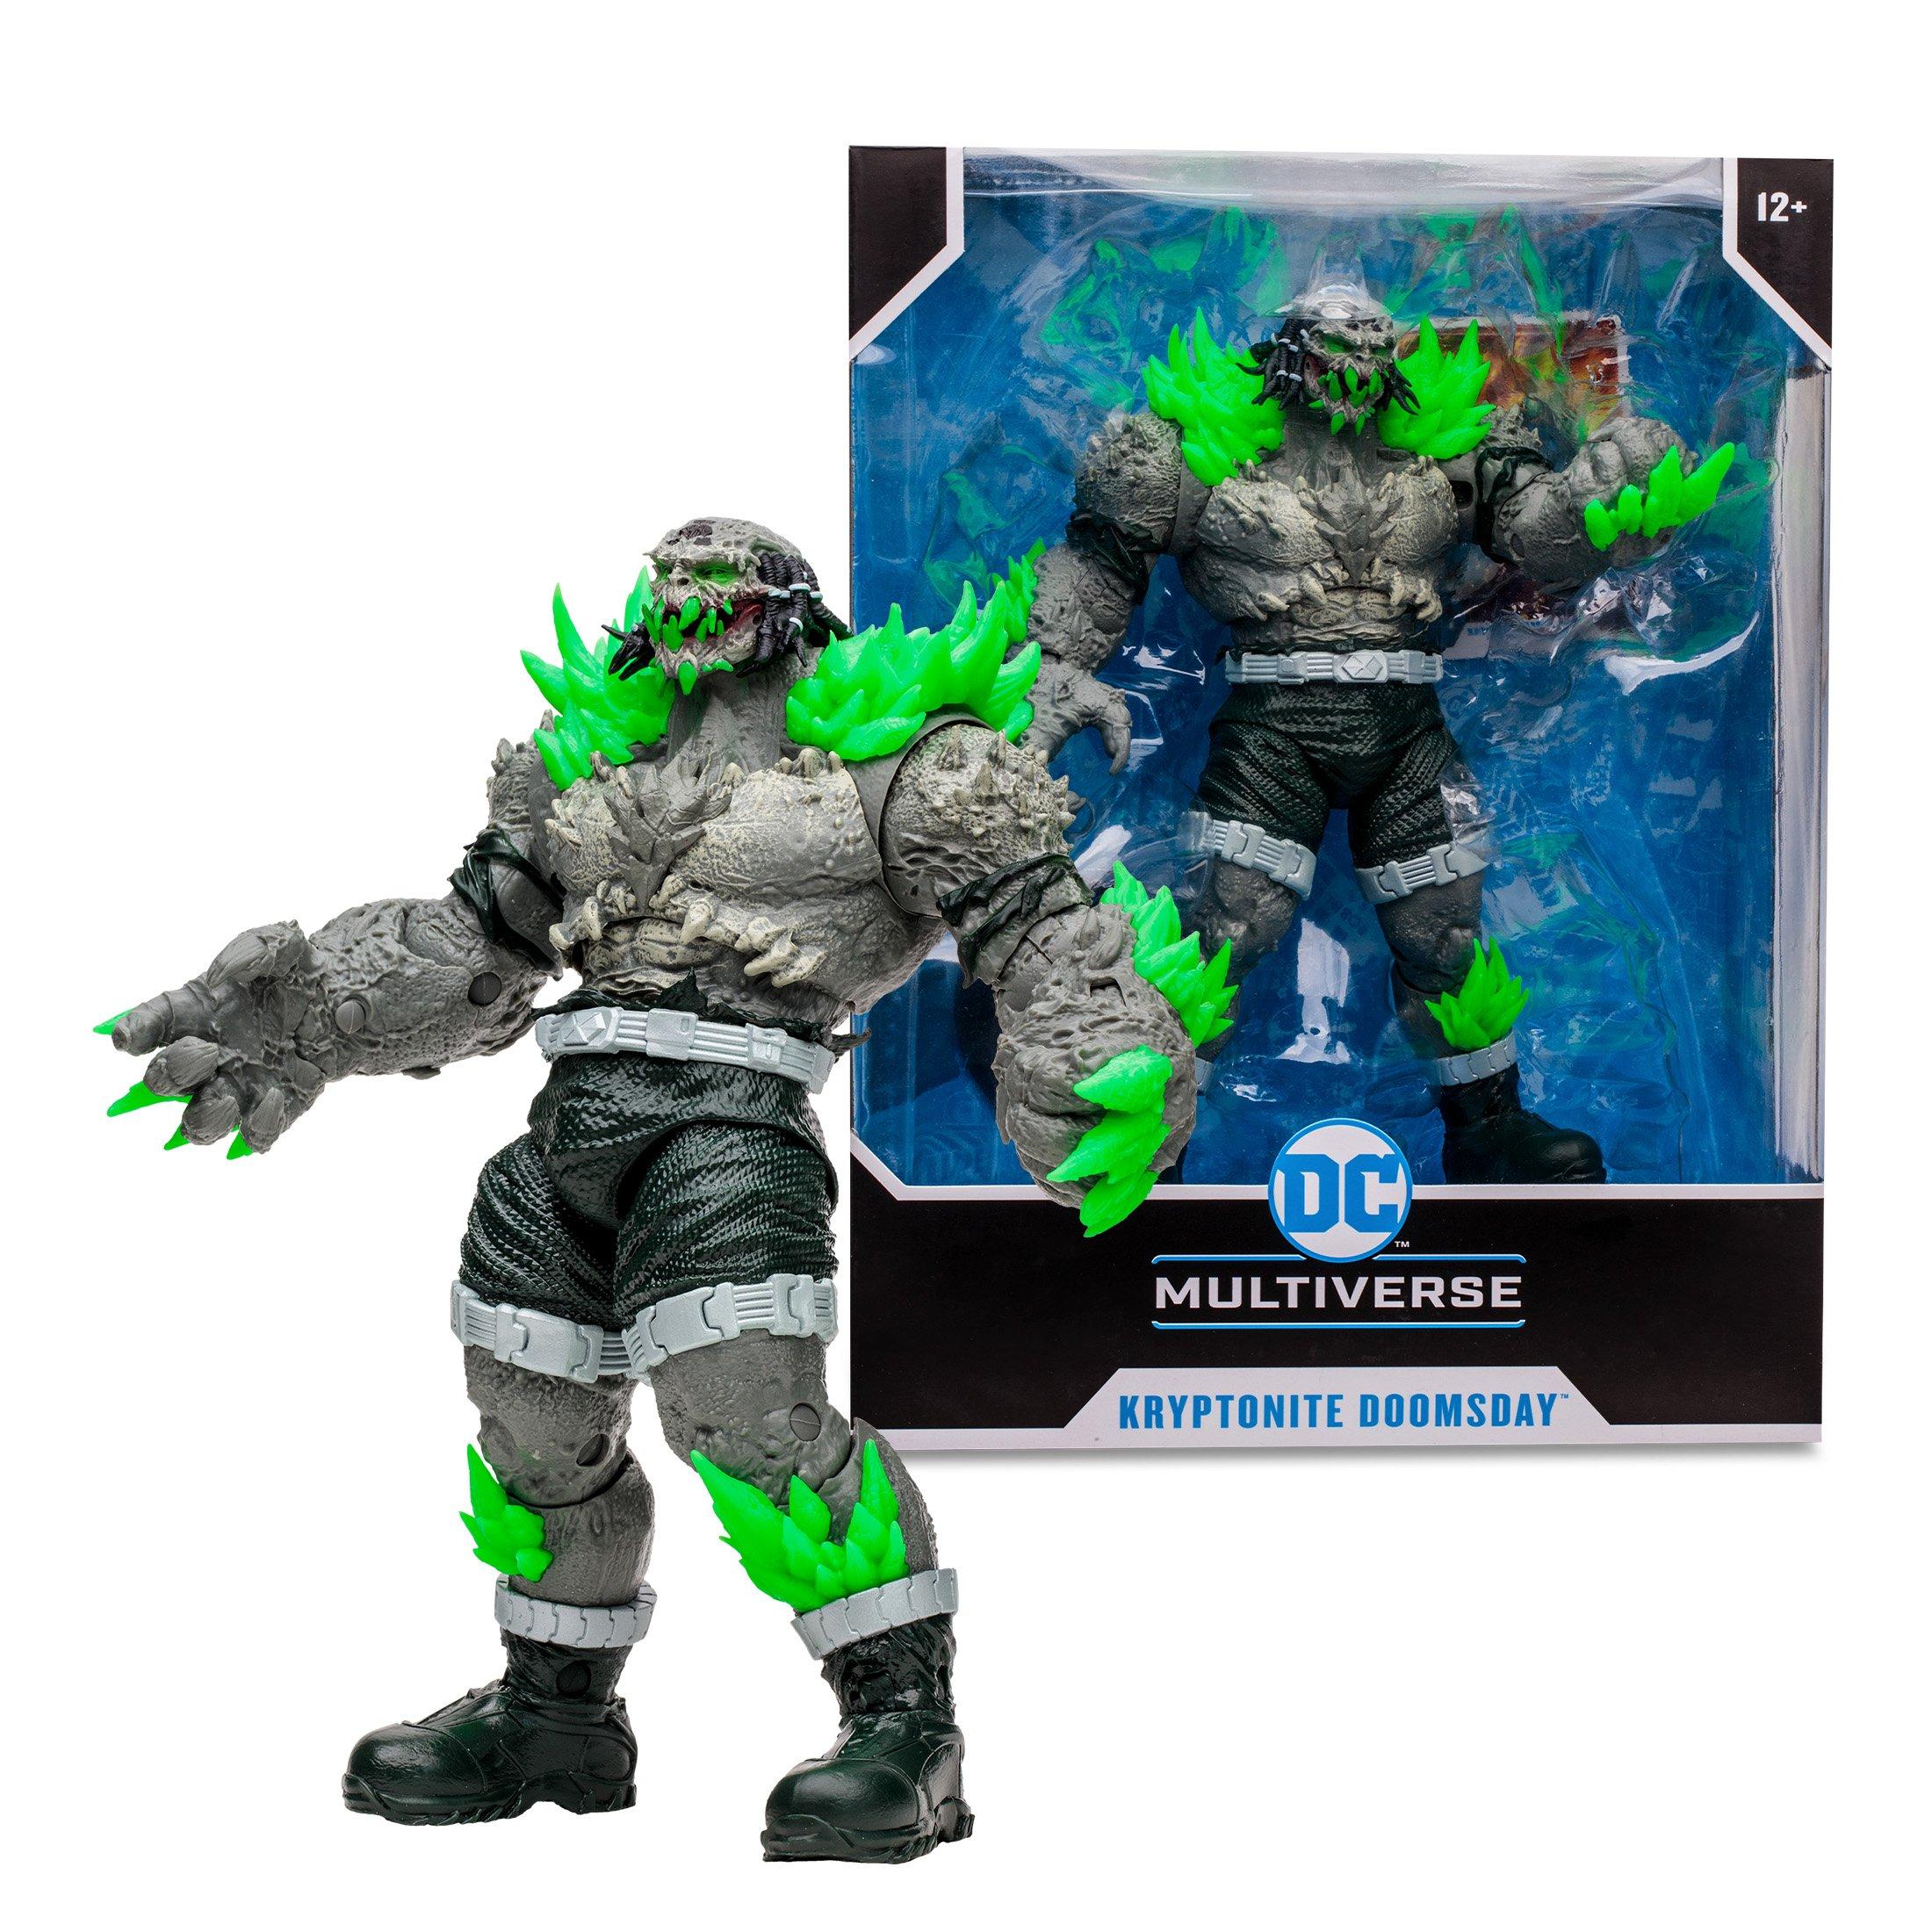 McFarlane Toys DC Multiverse Kryptonite Doomsday 7-in Action Figure